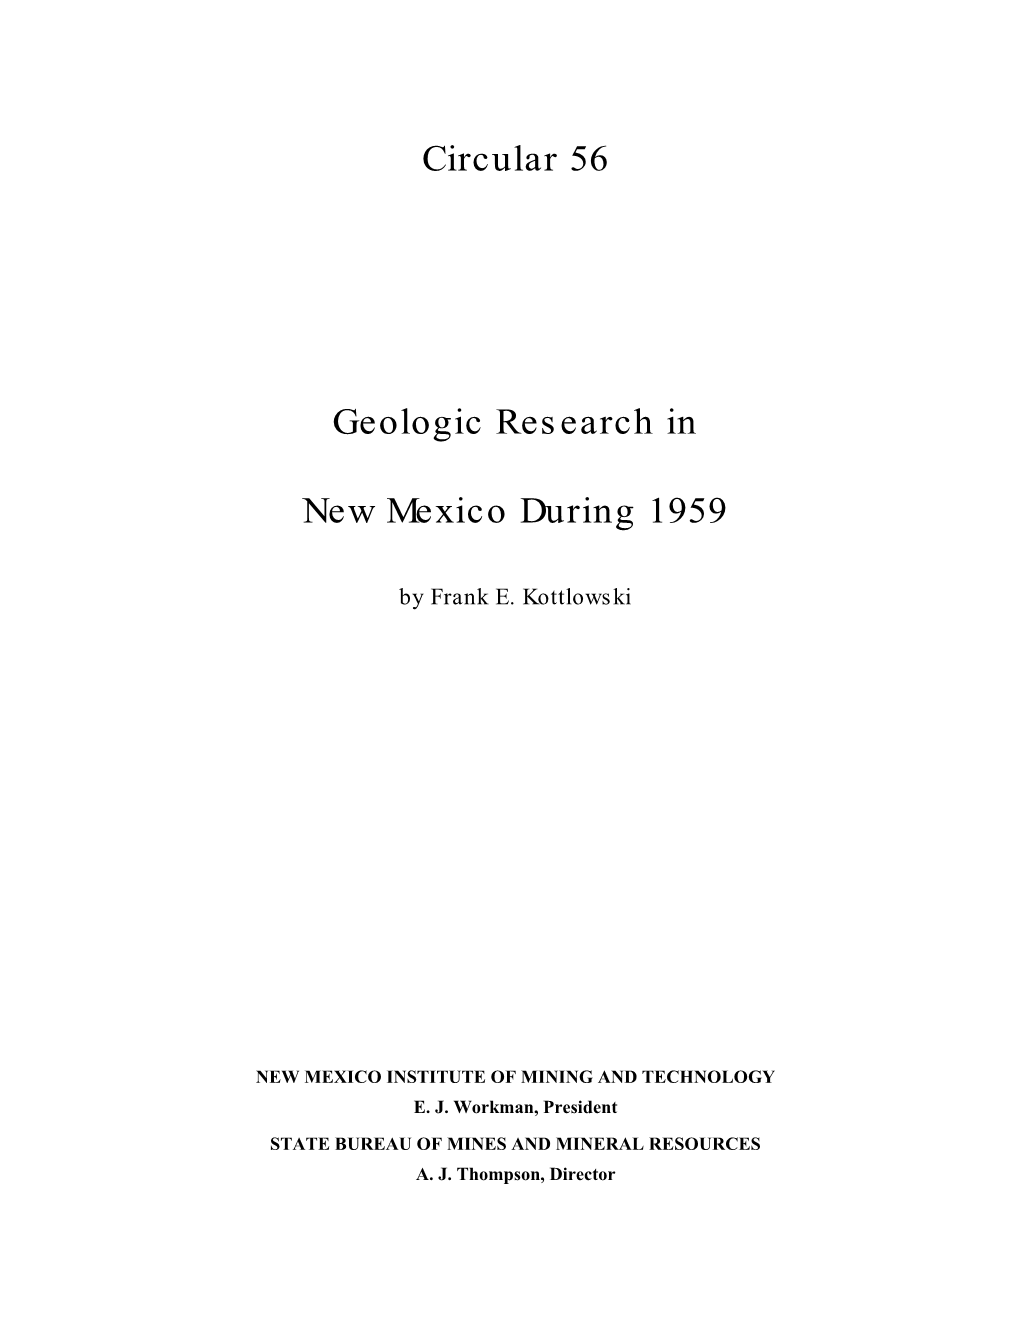 Geologic Research in New Mexico During 1959